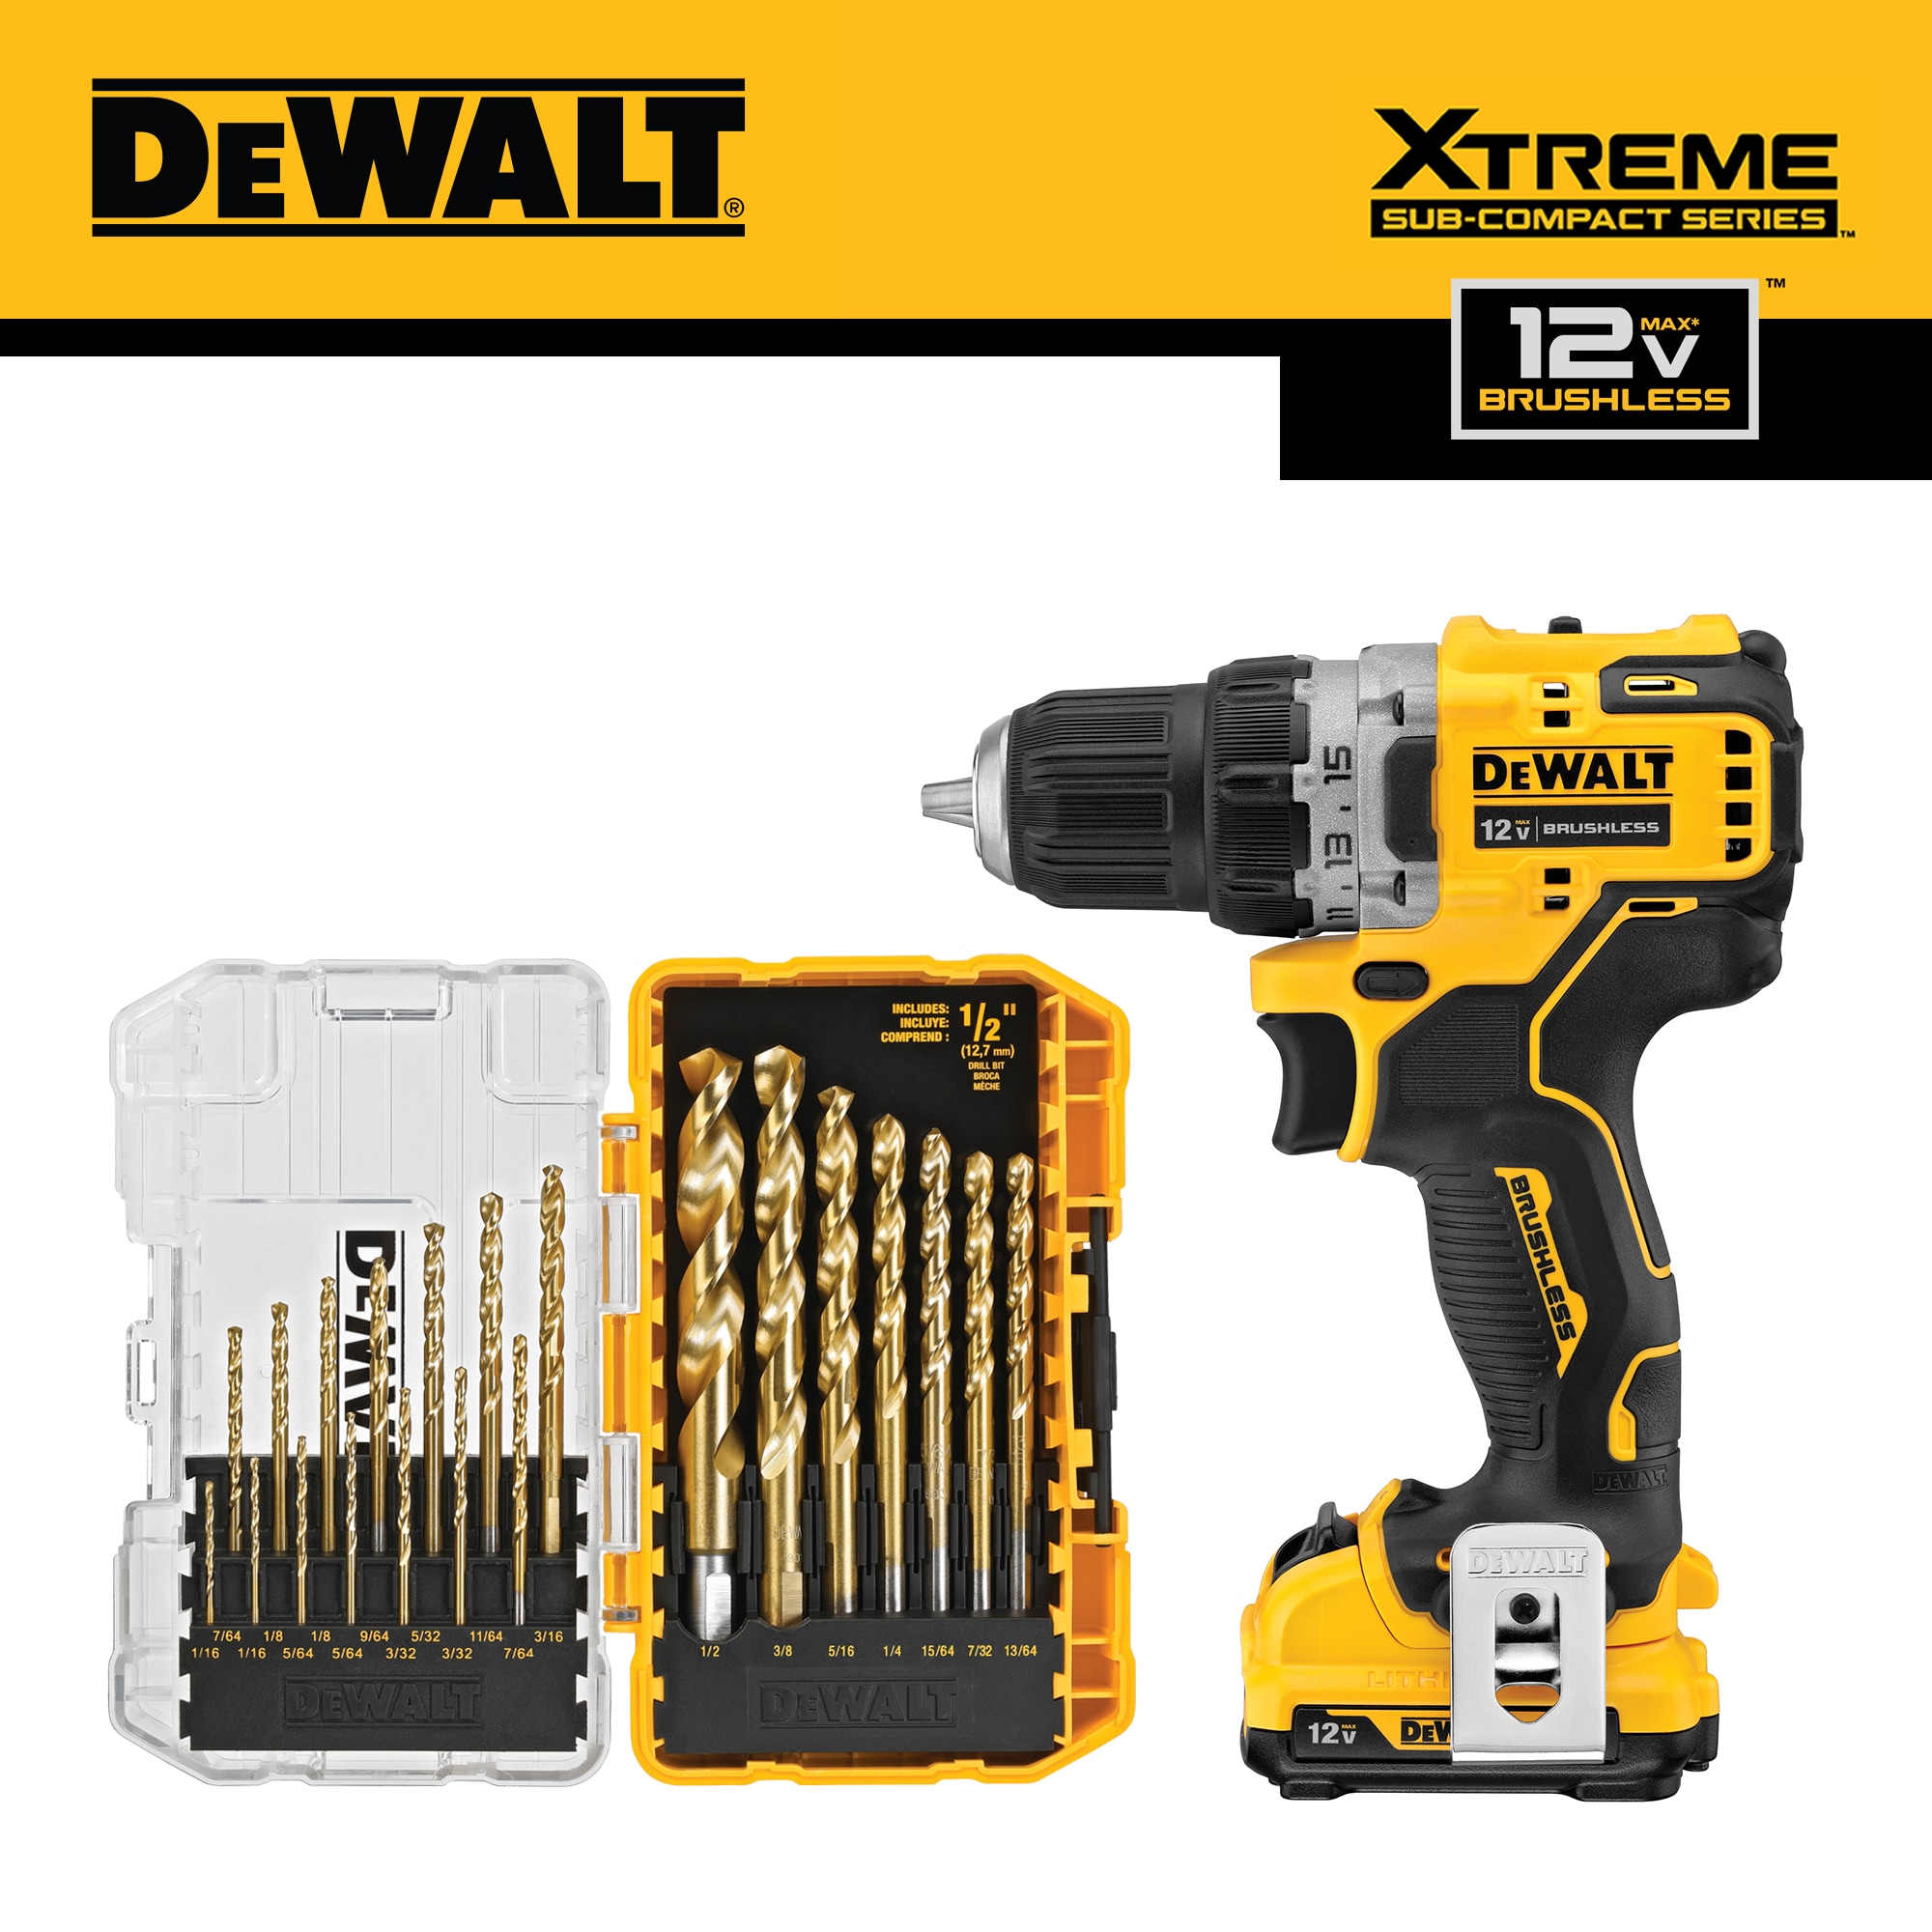 Shop DEWALT XTREME 12-volt Max 3/8-in Brushless Cordless Drill (2-Batteries Included and Charger Included) & 21-Piece Assorted x Set Titanium Twist Drill Bit at Lowes.com